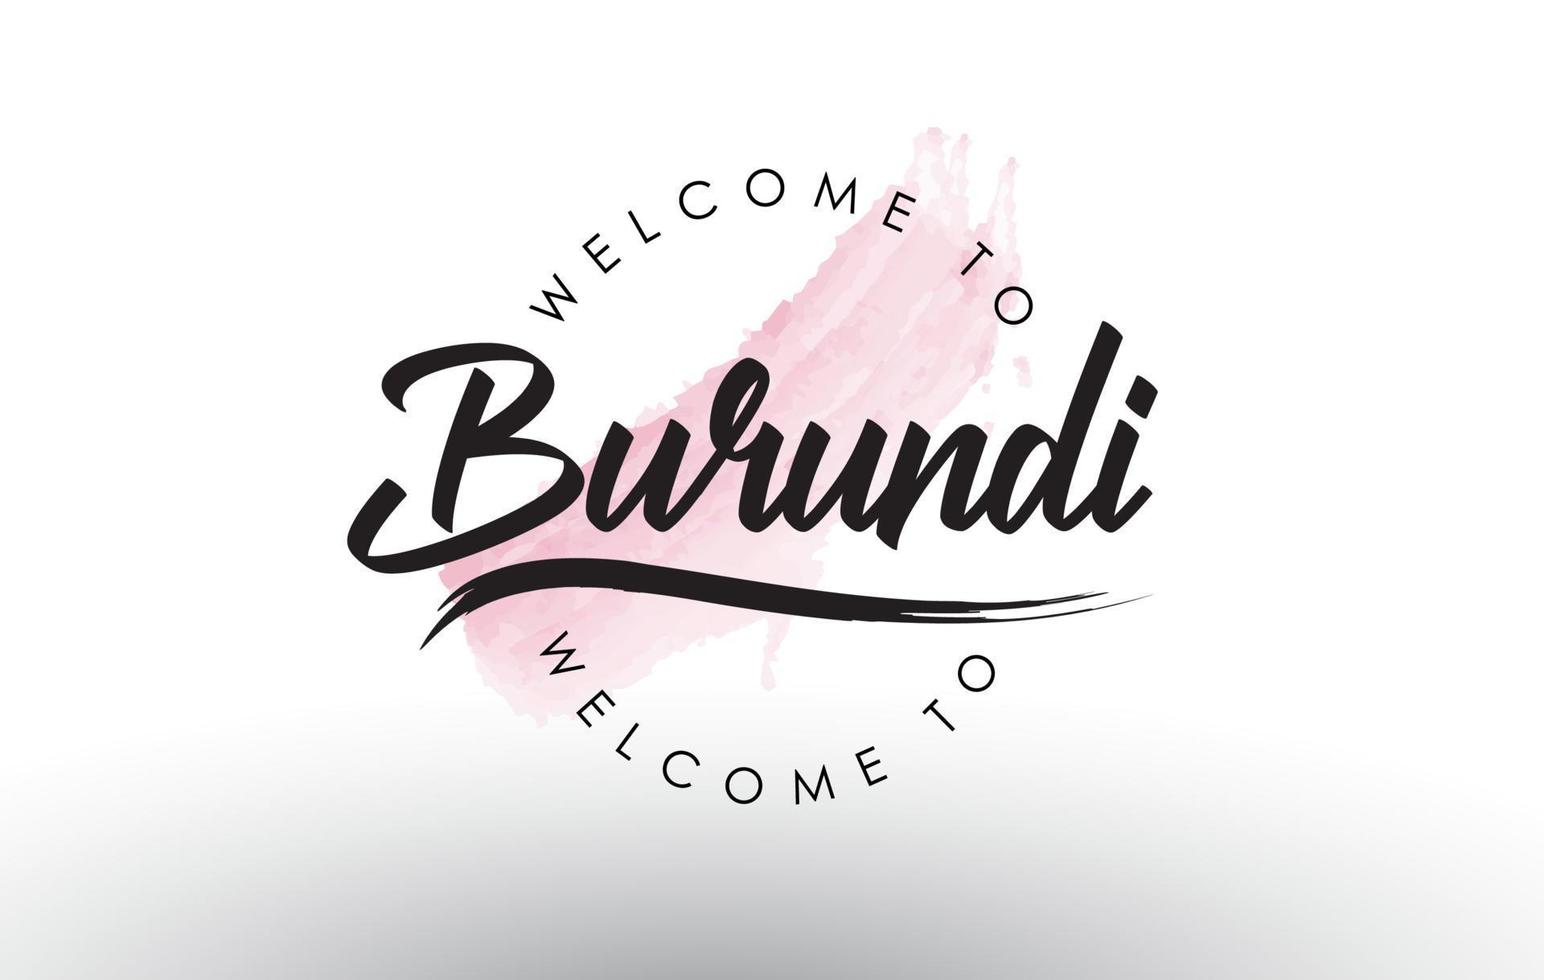 Burundi Welcome to Text with Watercolor Pink Brush Stroke vector